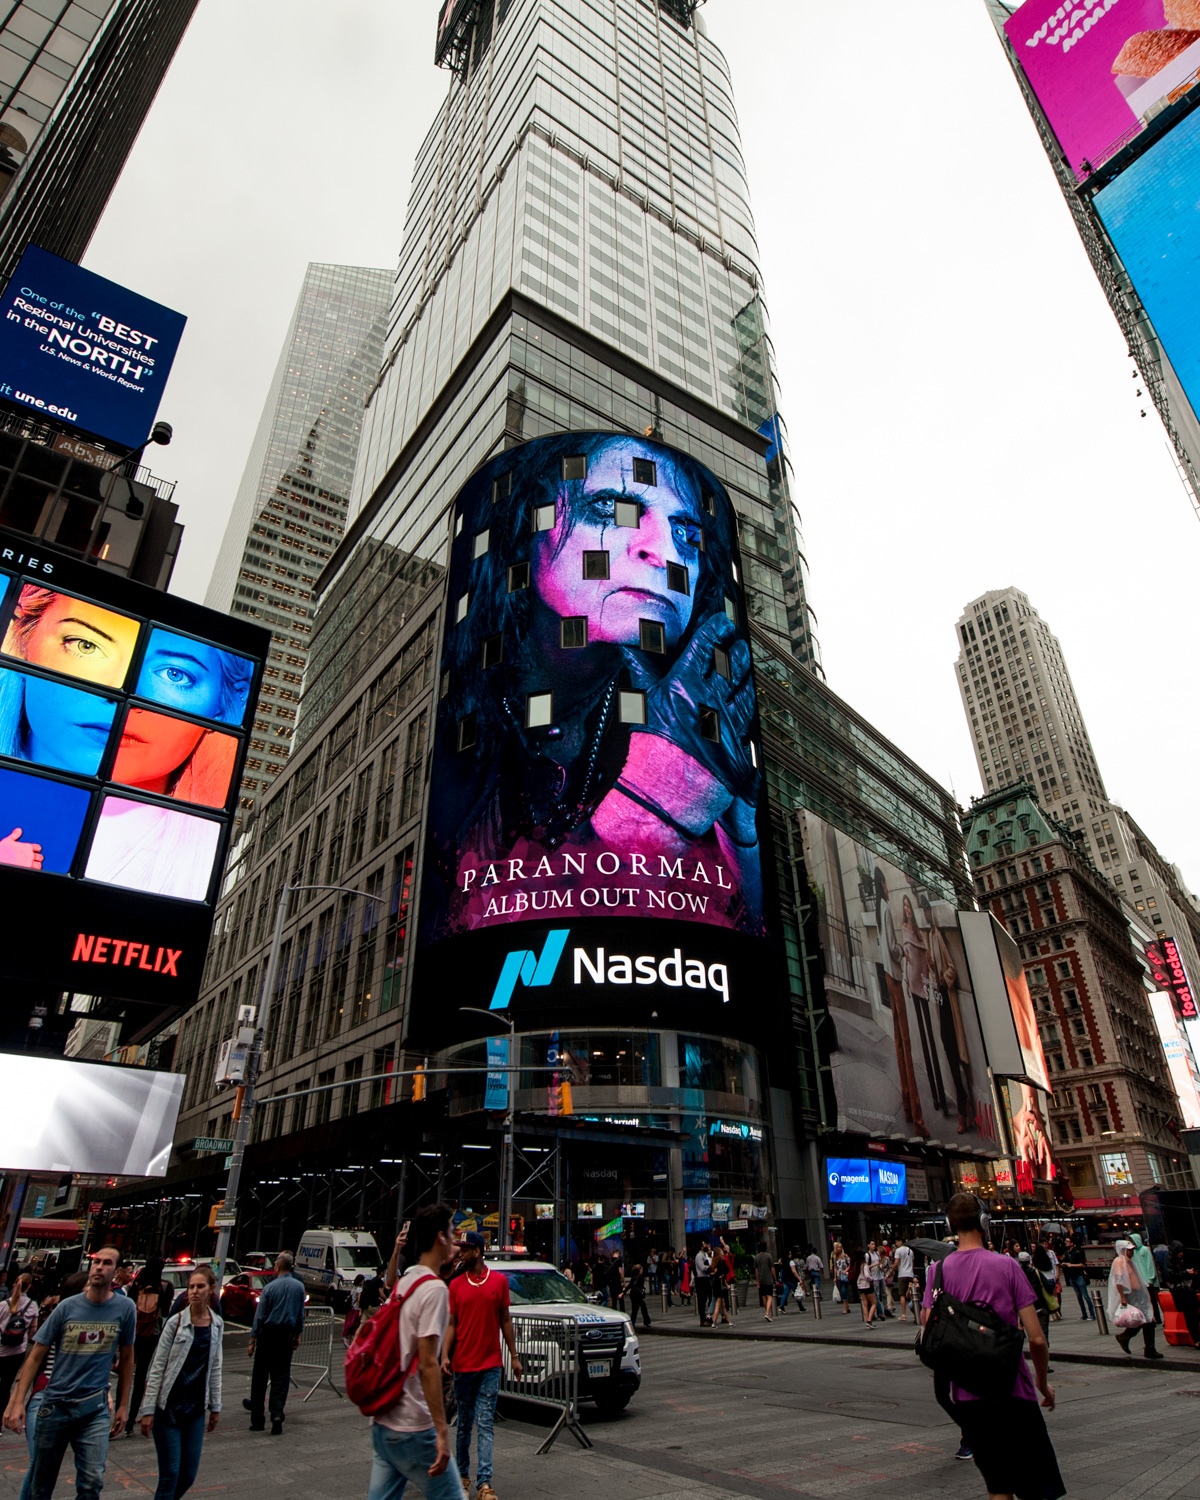 Alice Cooper Featured On NASDAQ Video Screen in Times Square